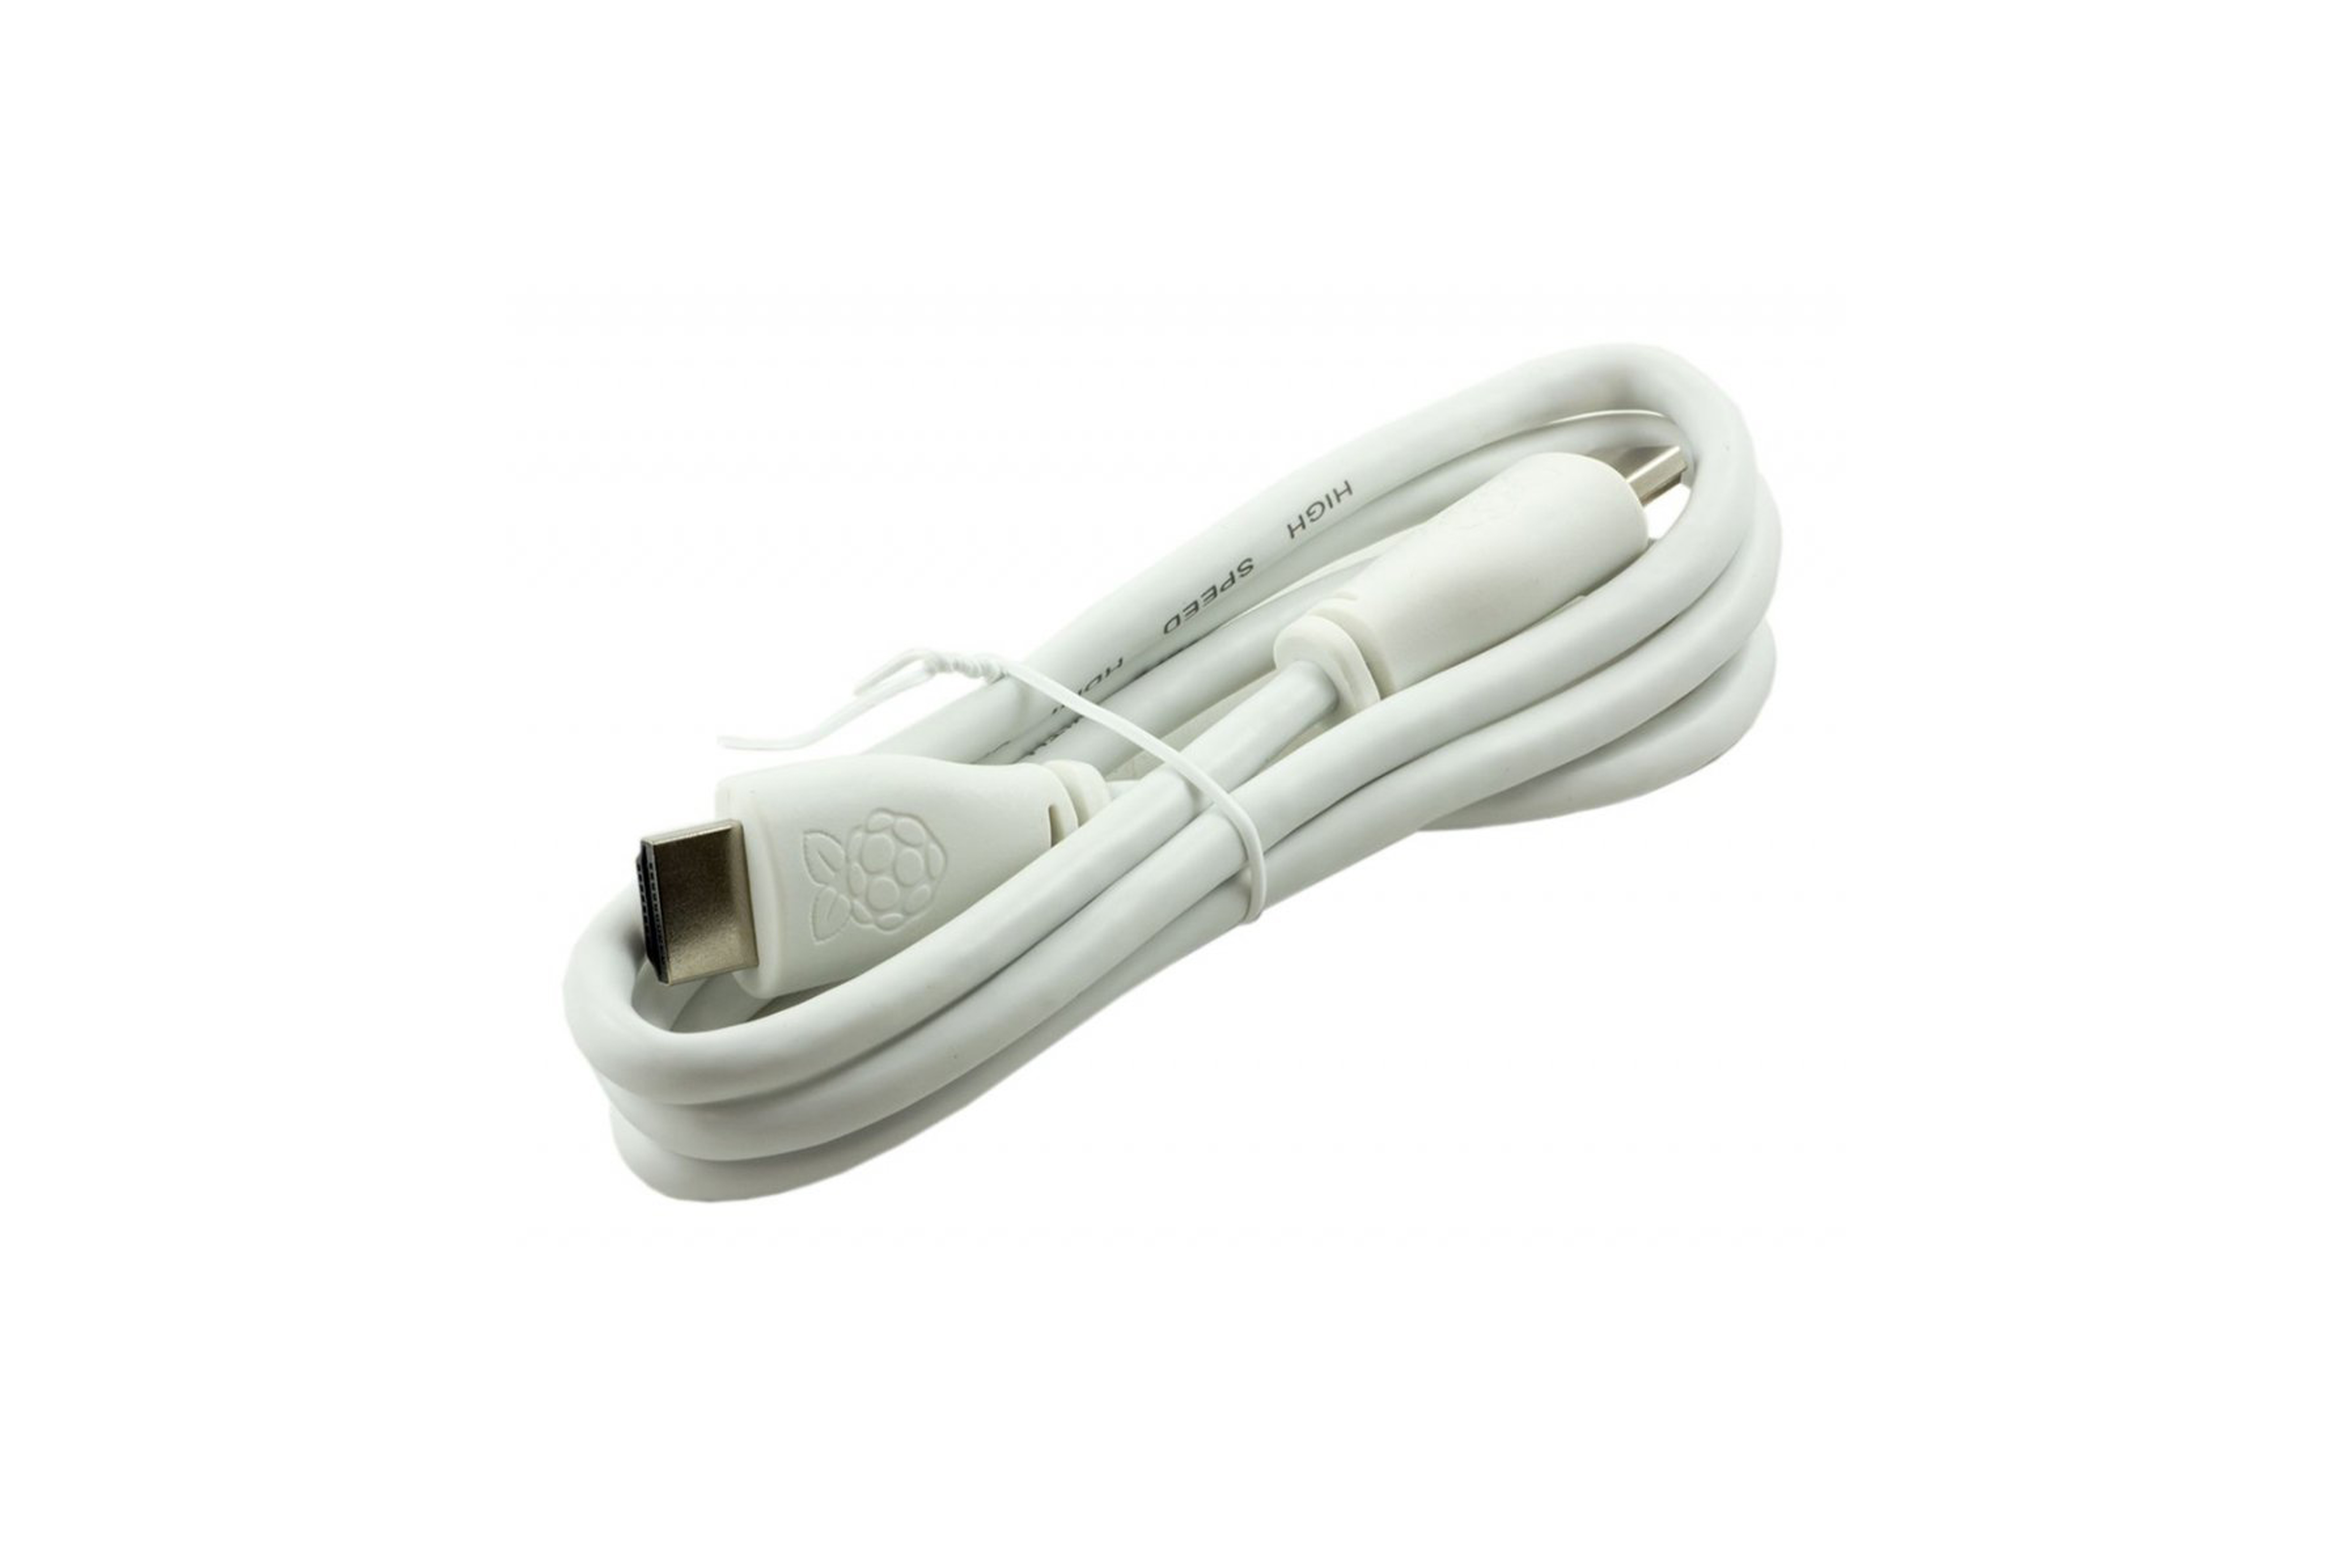 Official Raspberry Pi HDMI Cable - White 1M